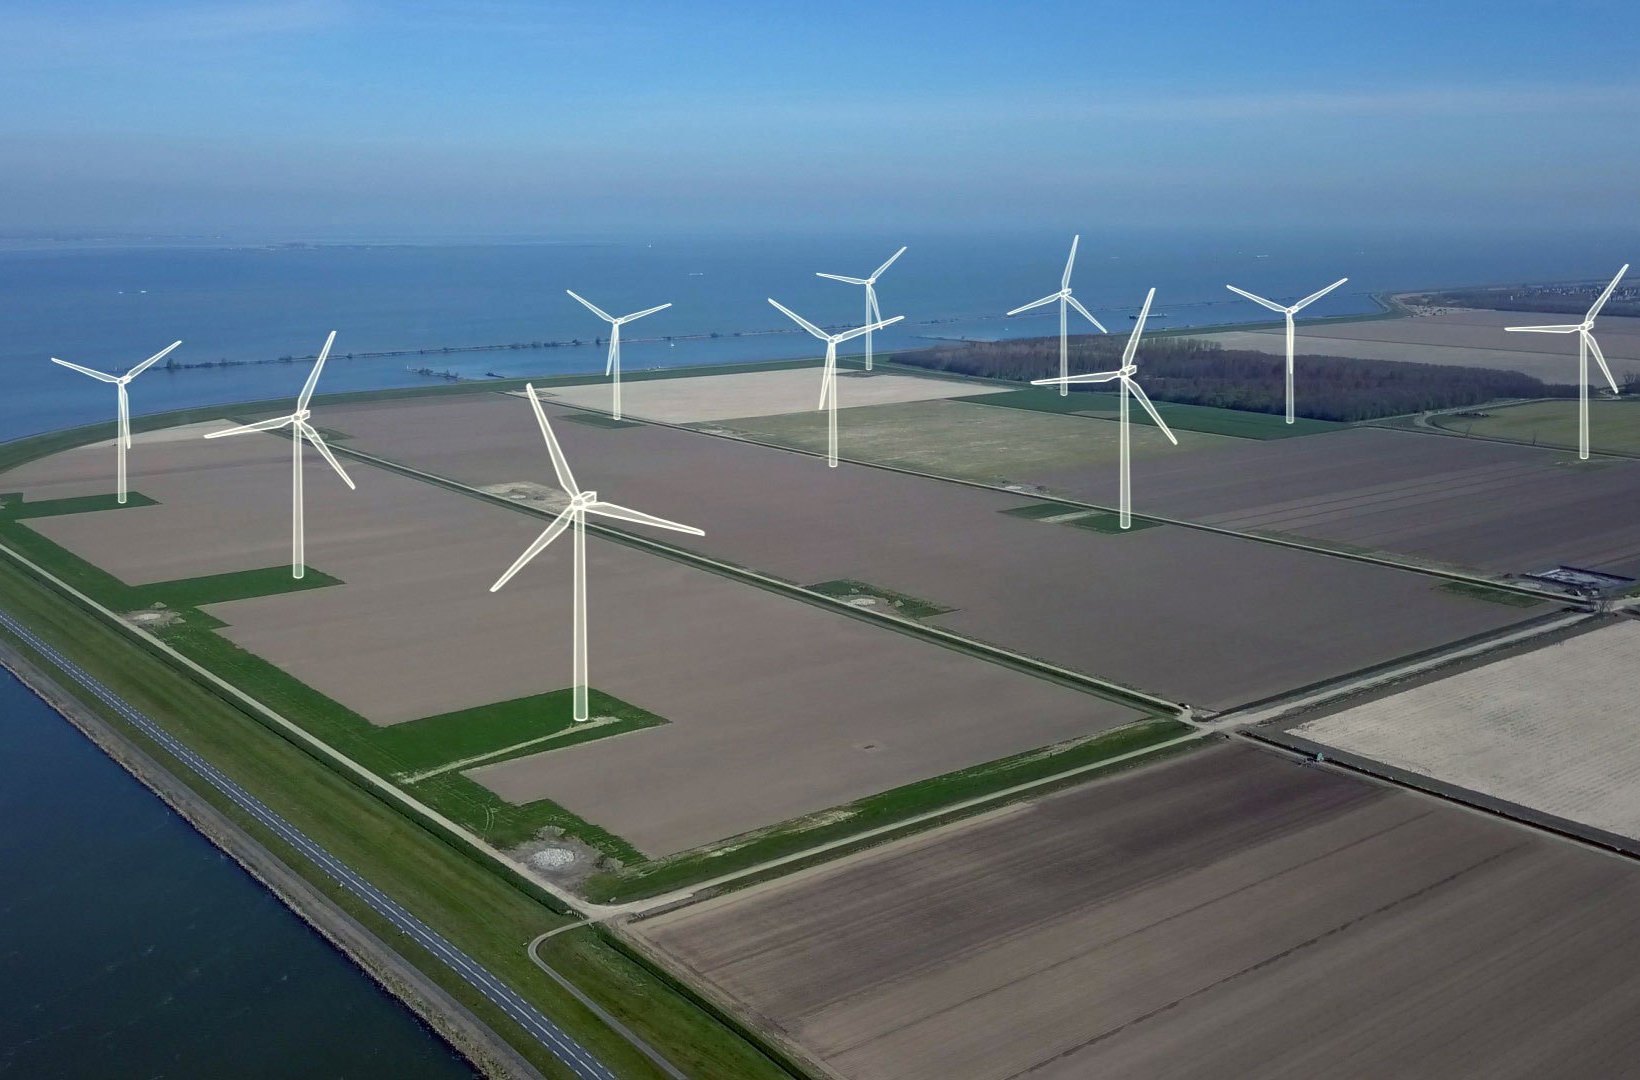 This is what the wind farm will look like in the near future. Photo: Jorrit Lousberg